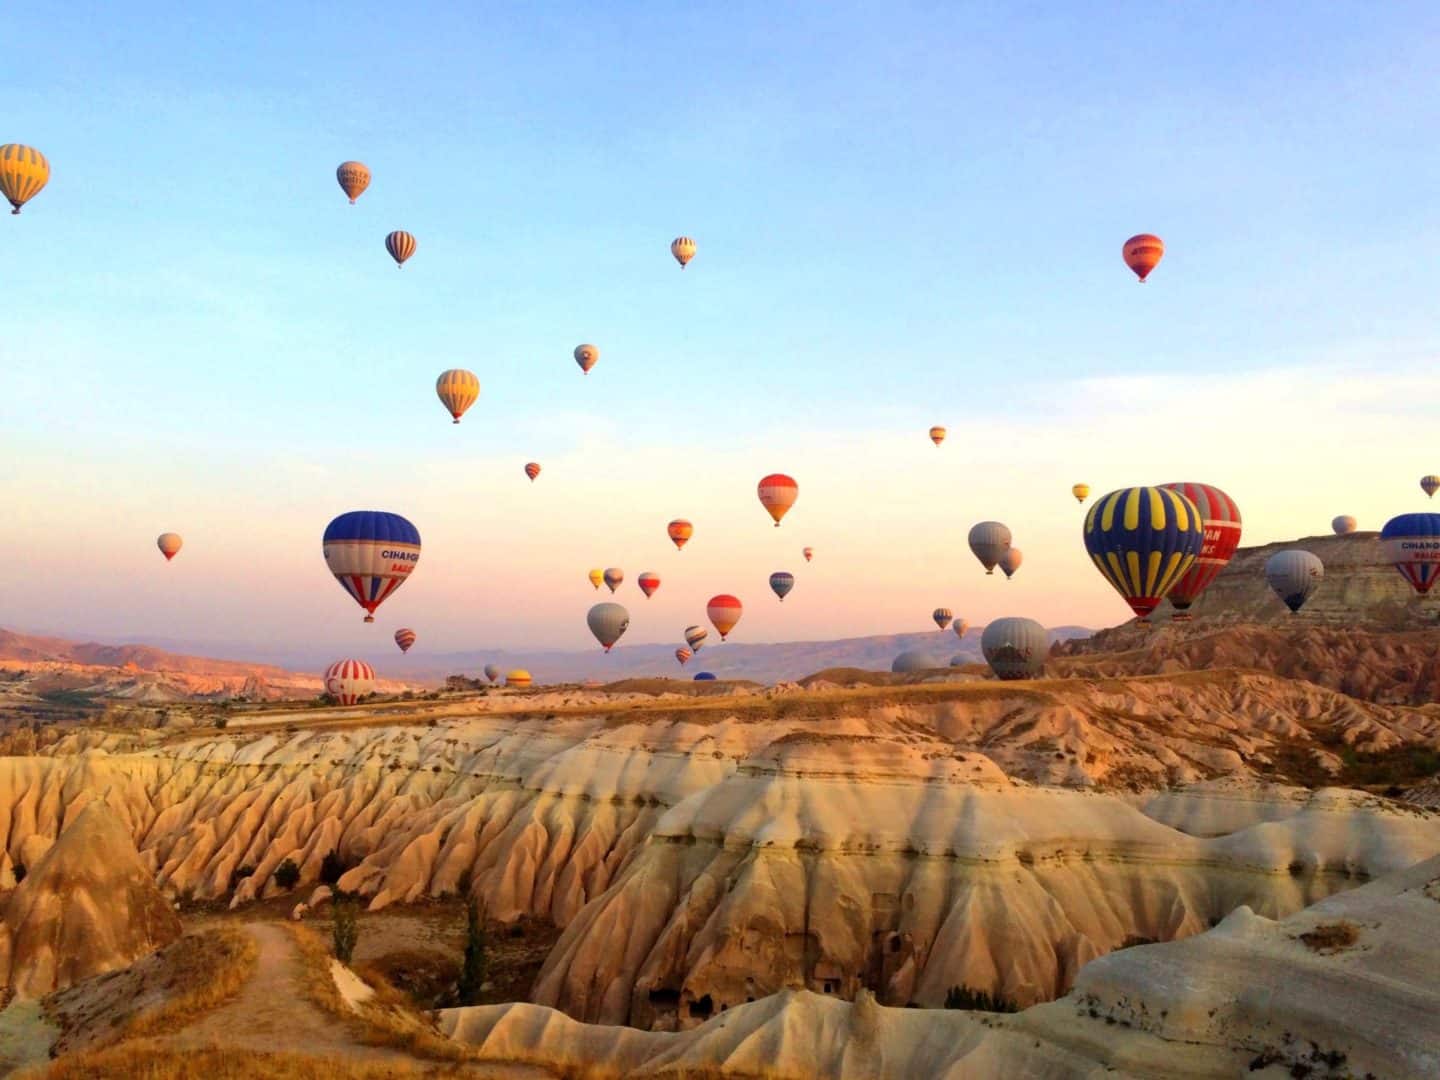 best time to visit Cappadocia, best time to see hot air balloons in Cappadocia?